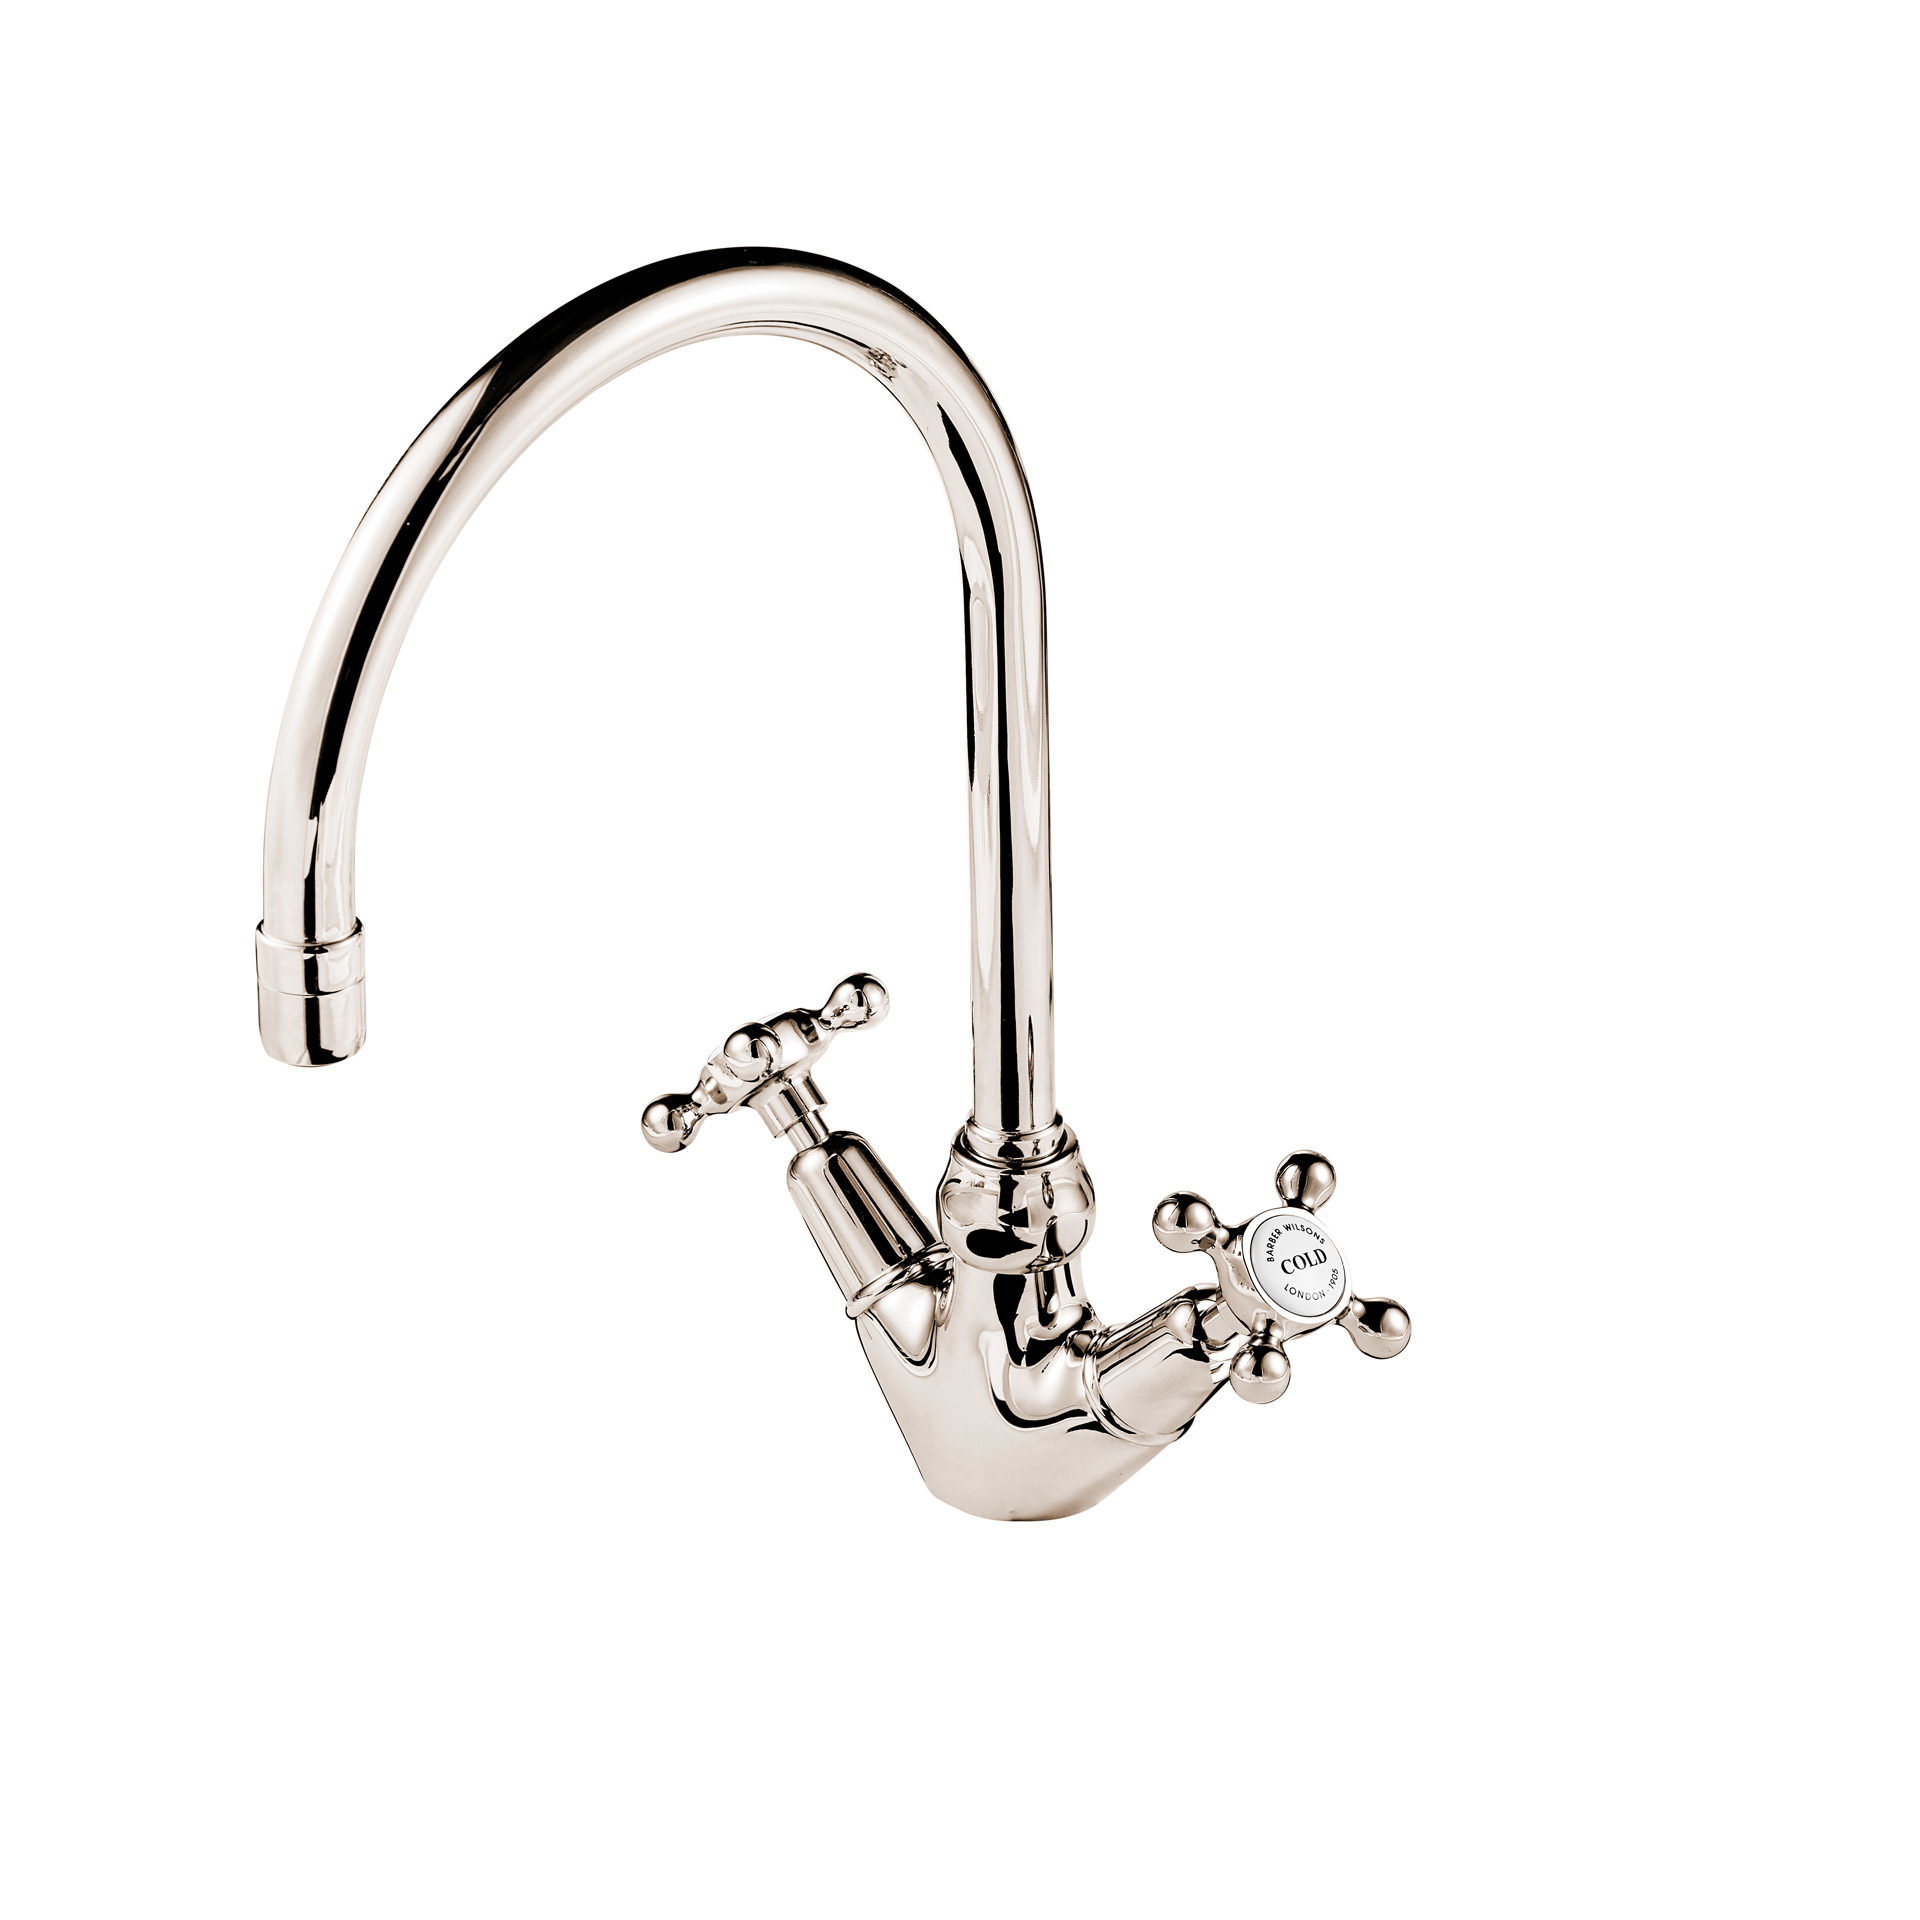 Deck mounted kitchen tap with swivel neck in polished nickel